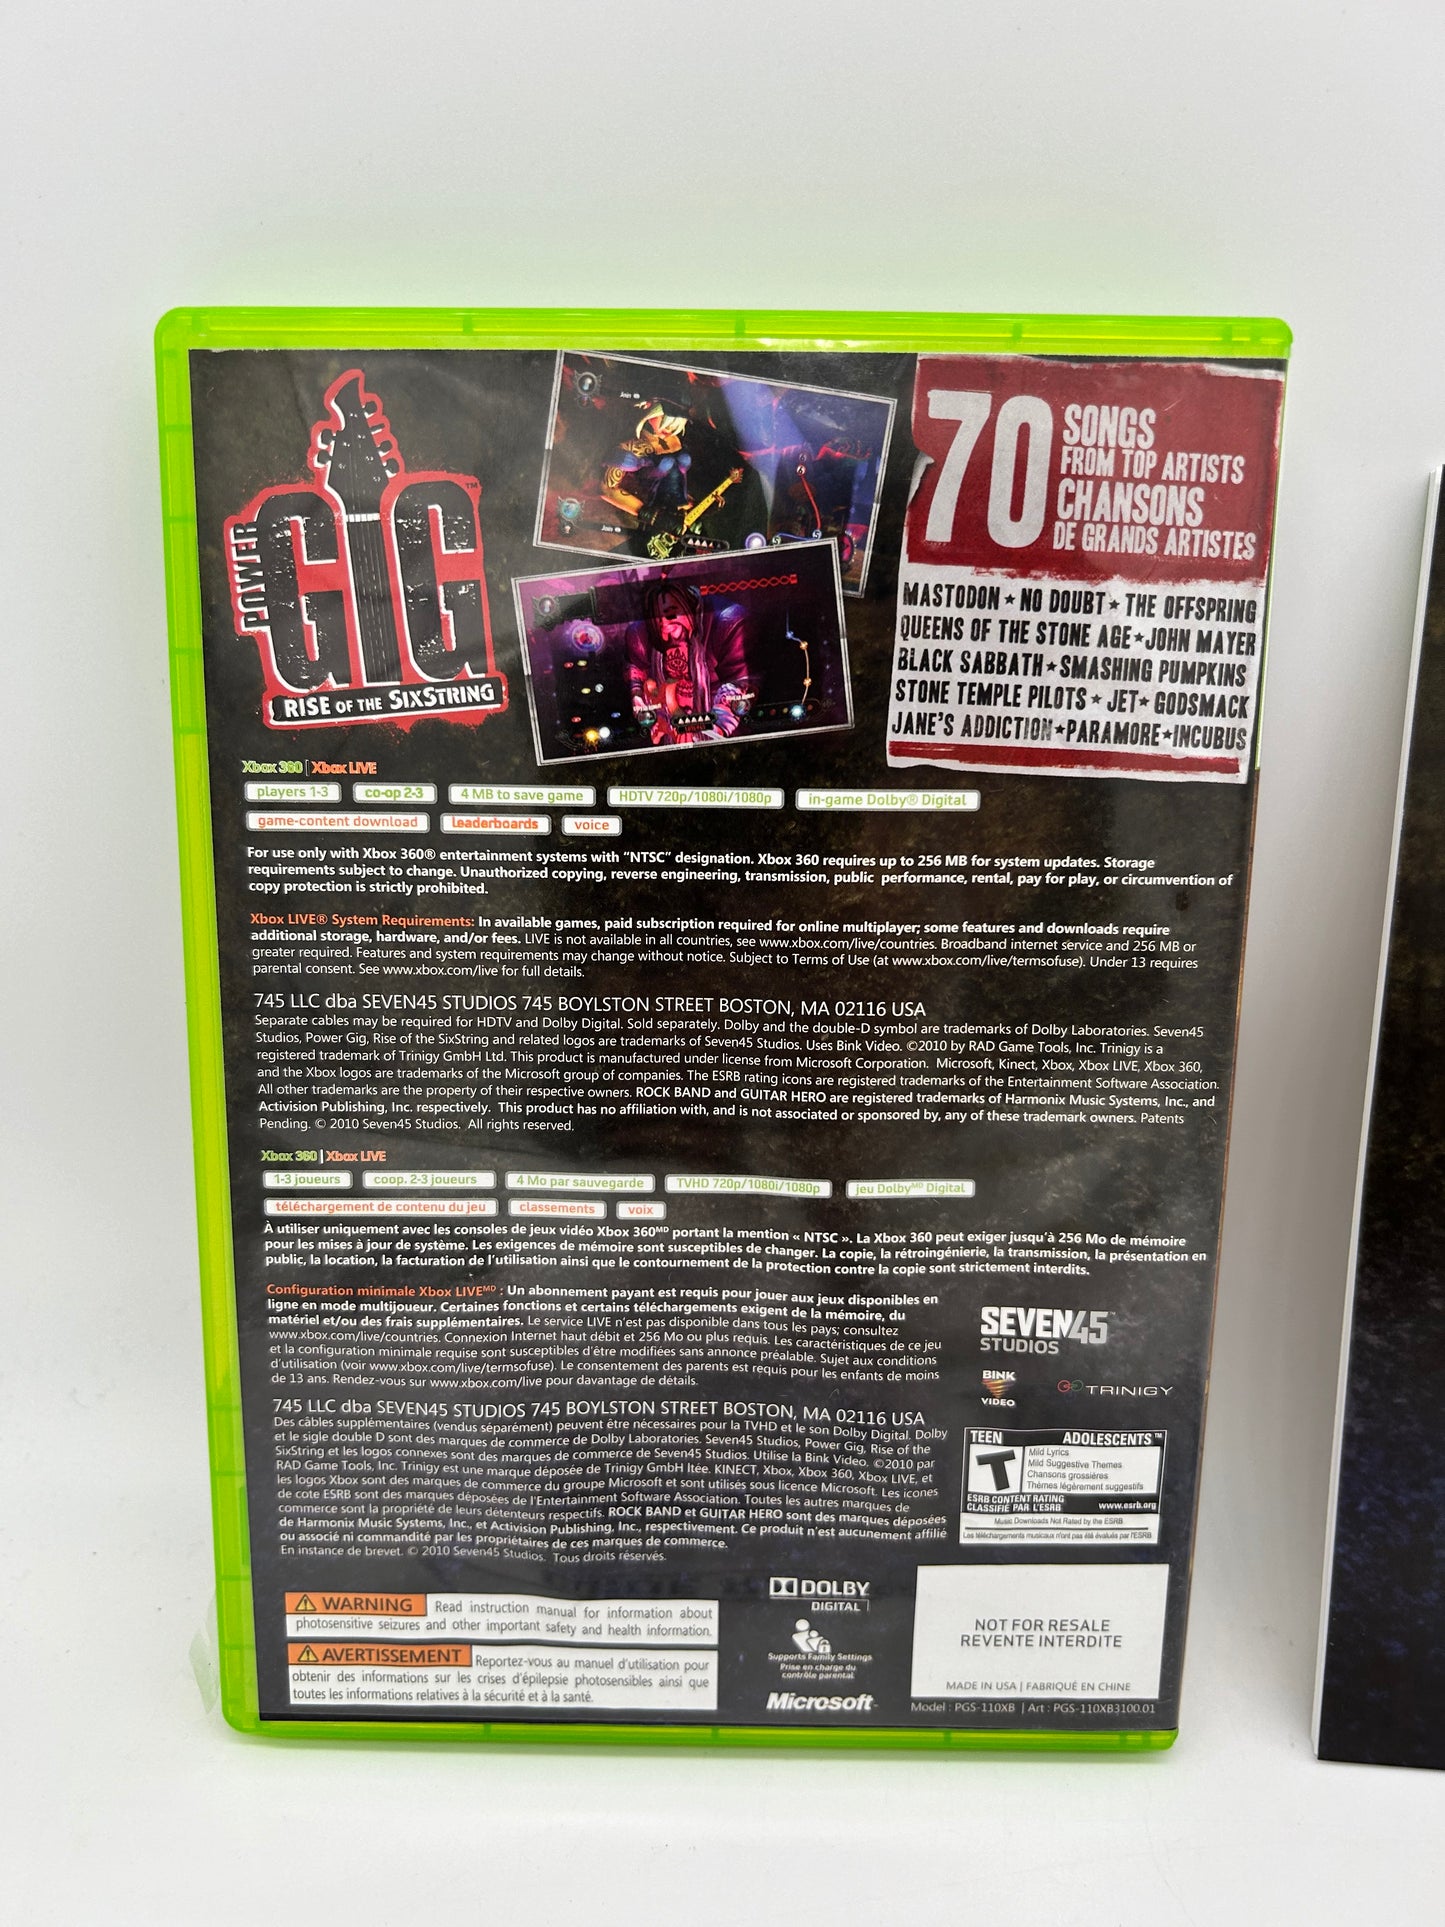 MiCROSOFT XBOX 360 | POWER GiG RiSE OF THE SiXSTRiNG